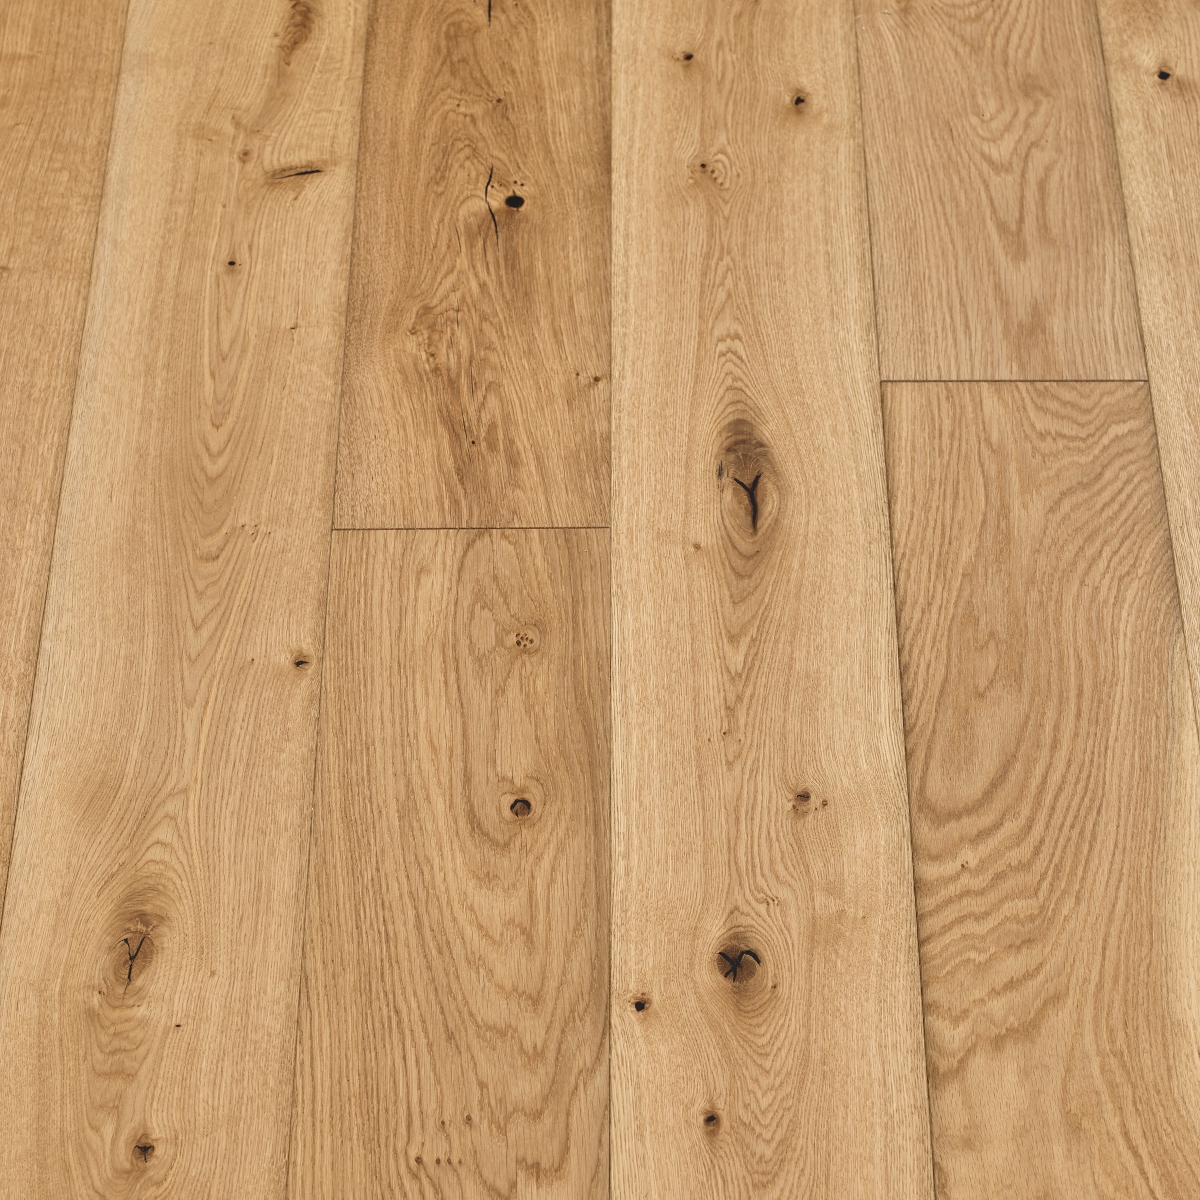 Classic Natural Woodflooring - image presenting a natural-toned woodflooring with an authentic and organic look.